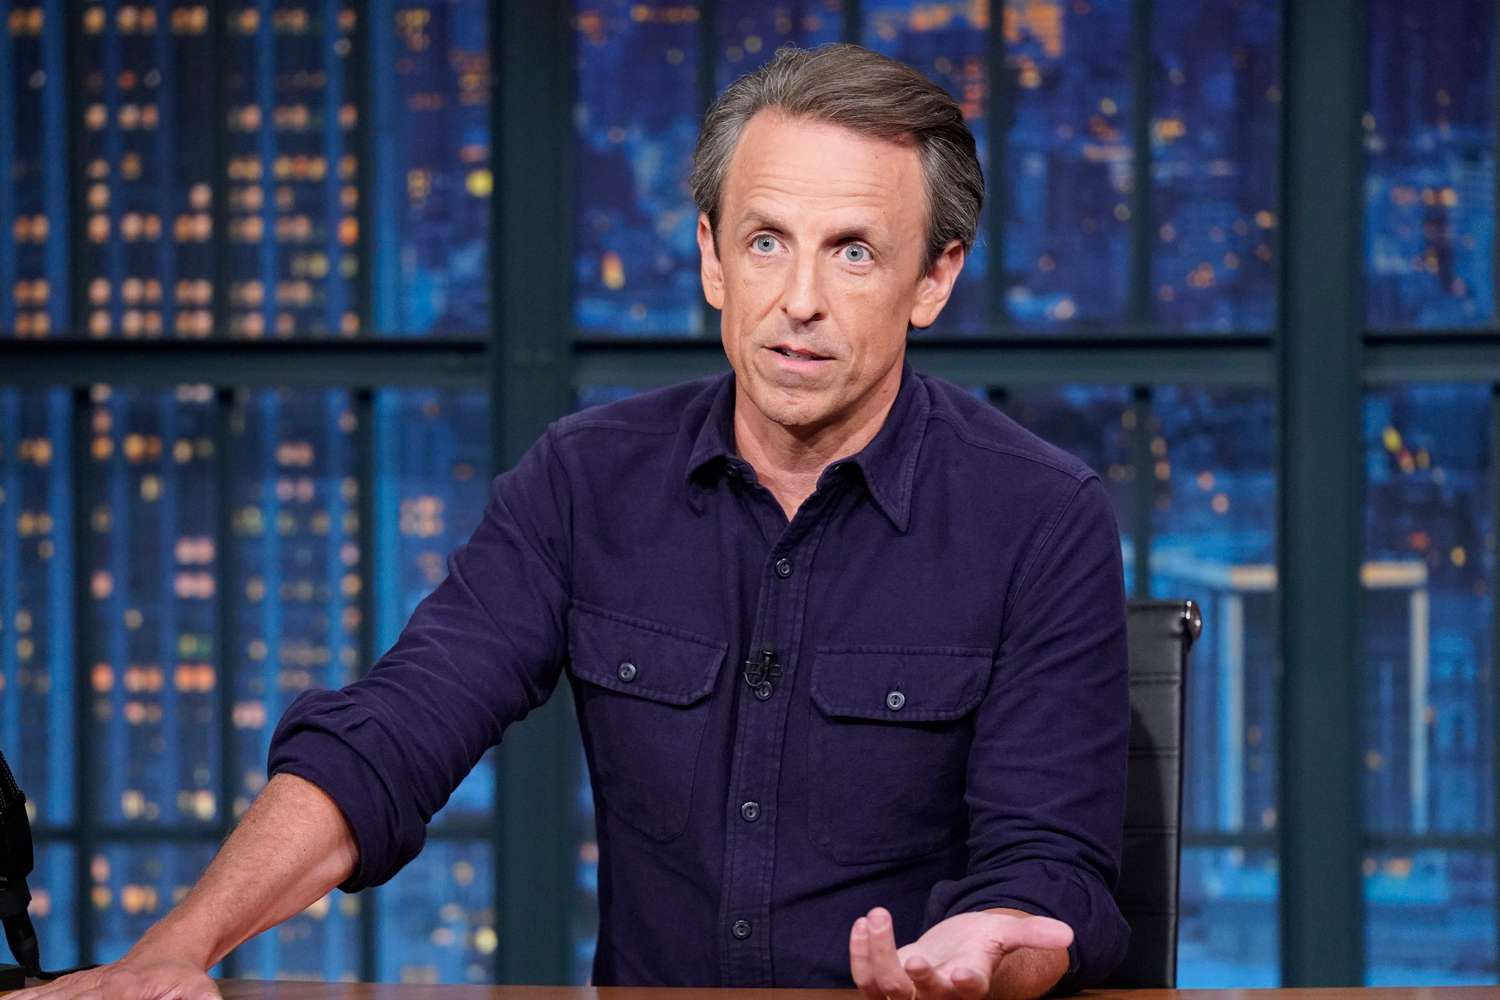 Seth Meyers Addresses Trump Assassination Attempt in Sobering Monologue, Calling It a 'Poison to Our Democracy'